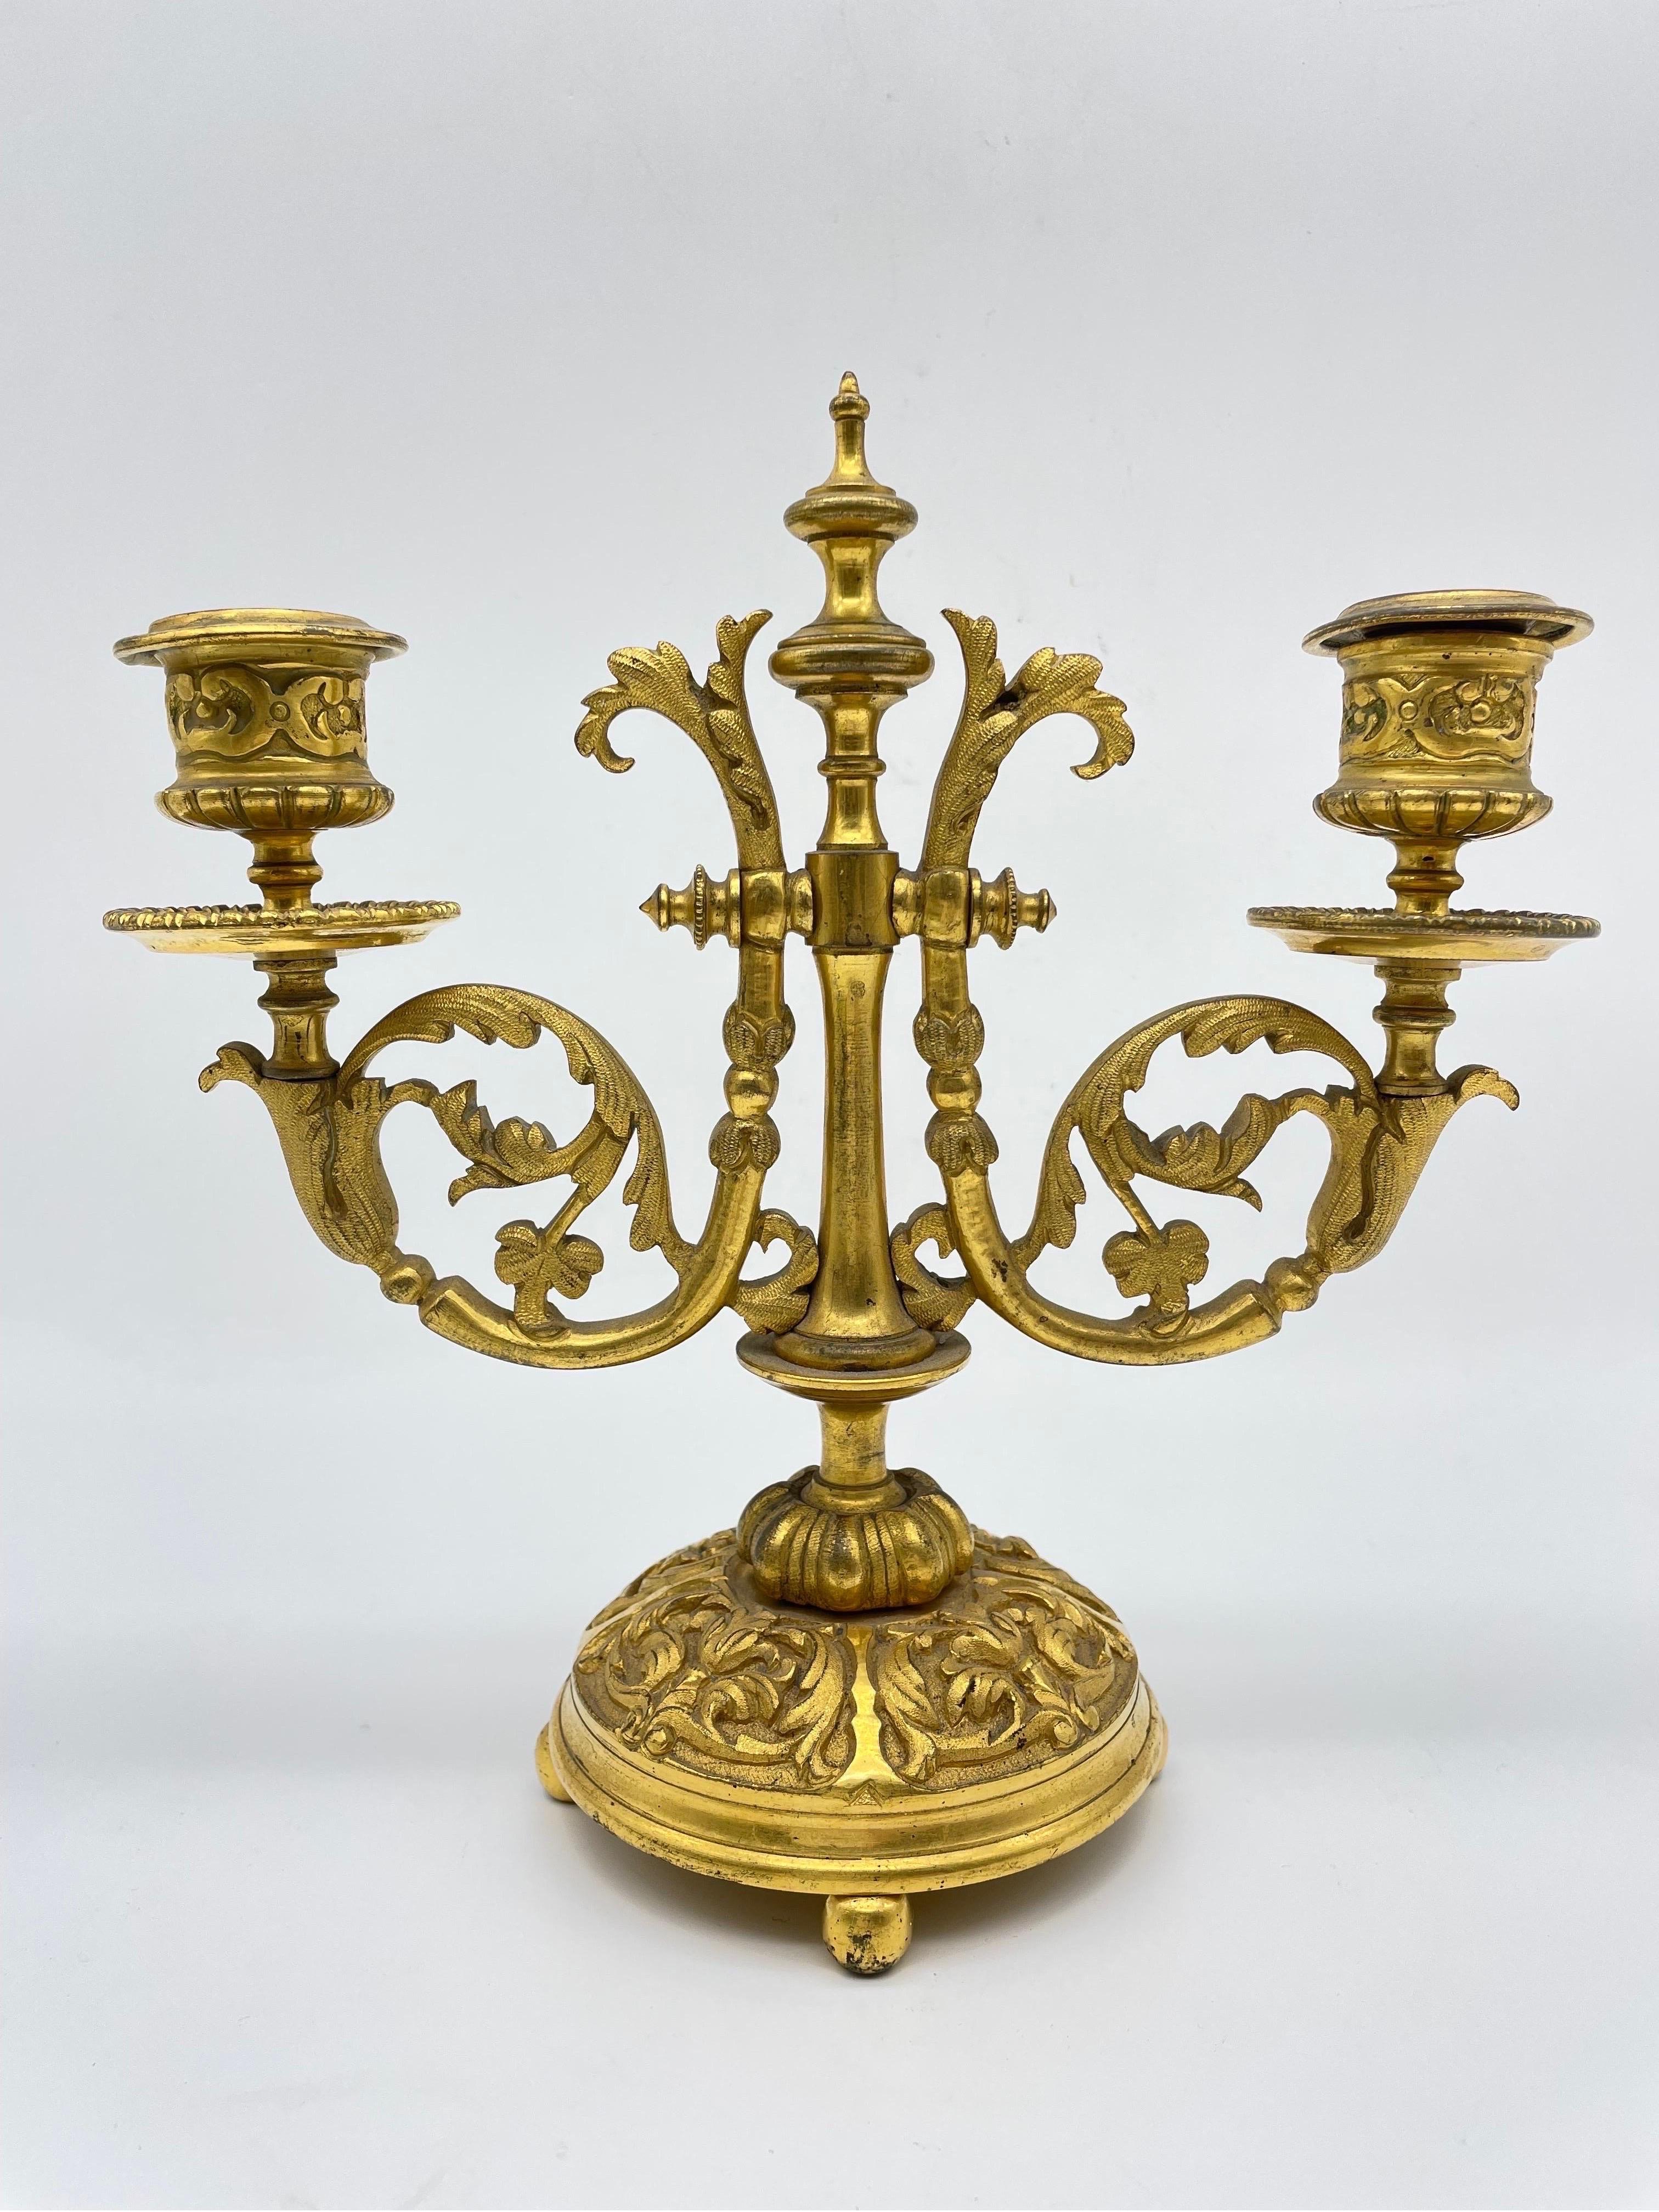 Noble neoclassical candlestick, gilded bronze, around 1900

Two-armed candlestick, solid bronze, finely chased and gilded. Very high quality processed. Arched base on four ball feet. Strongly curved light arms.France around 1900